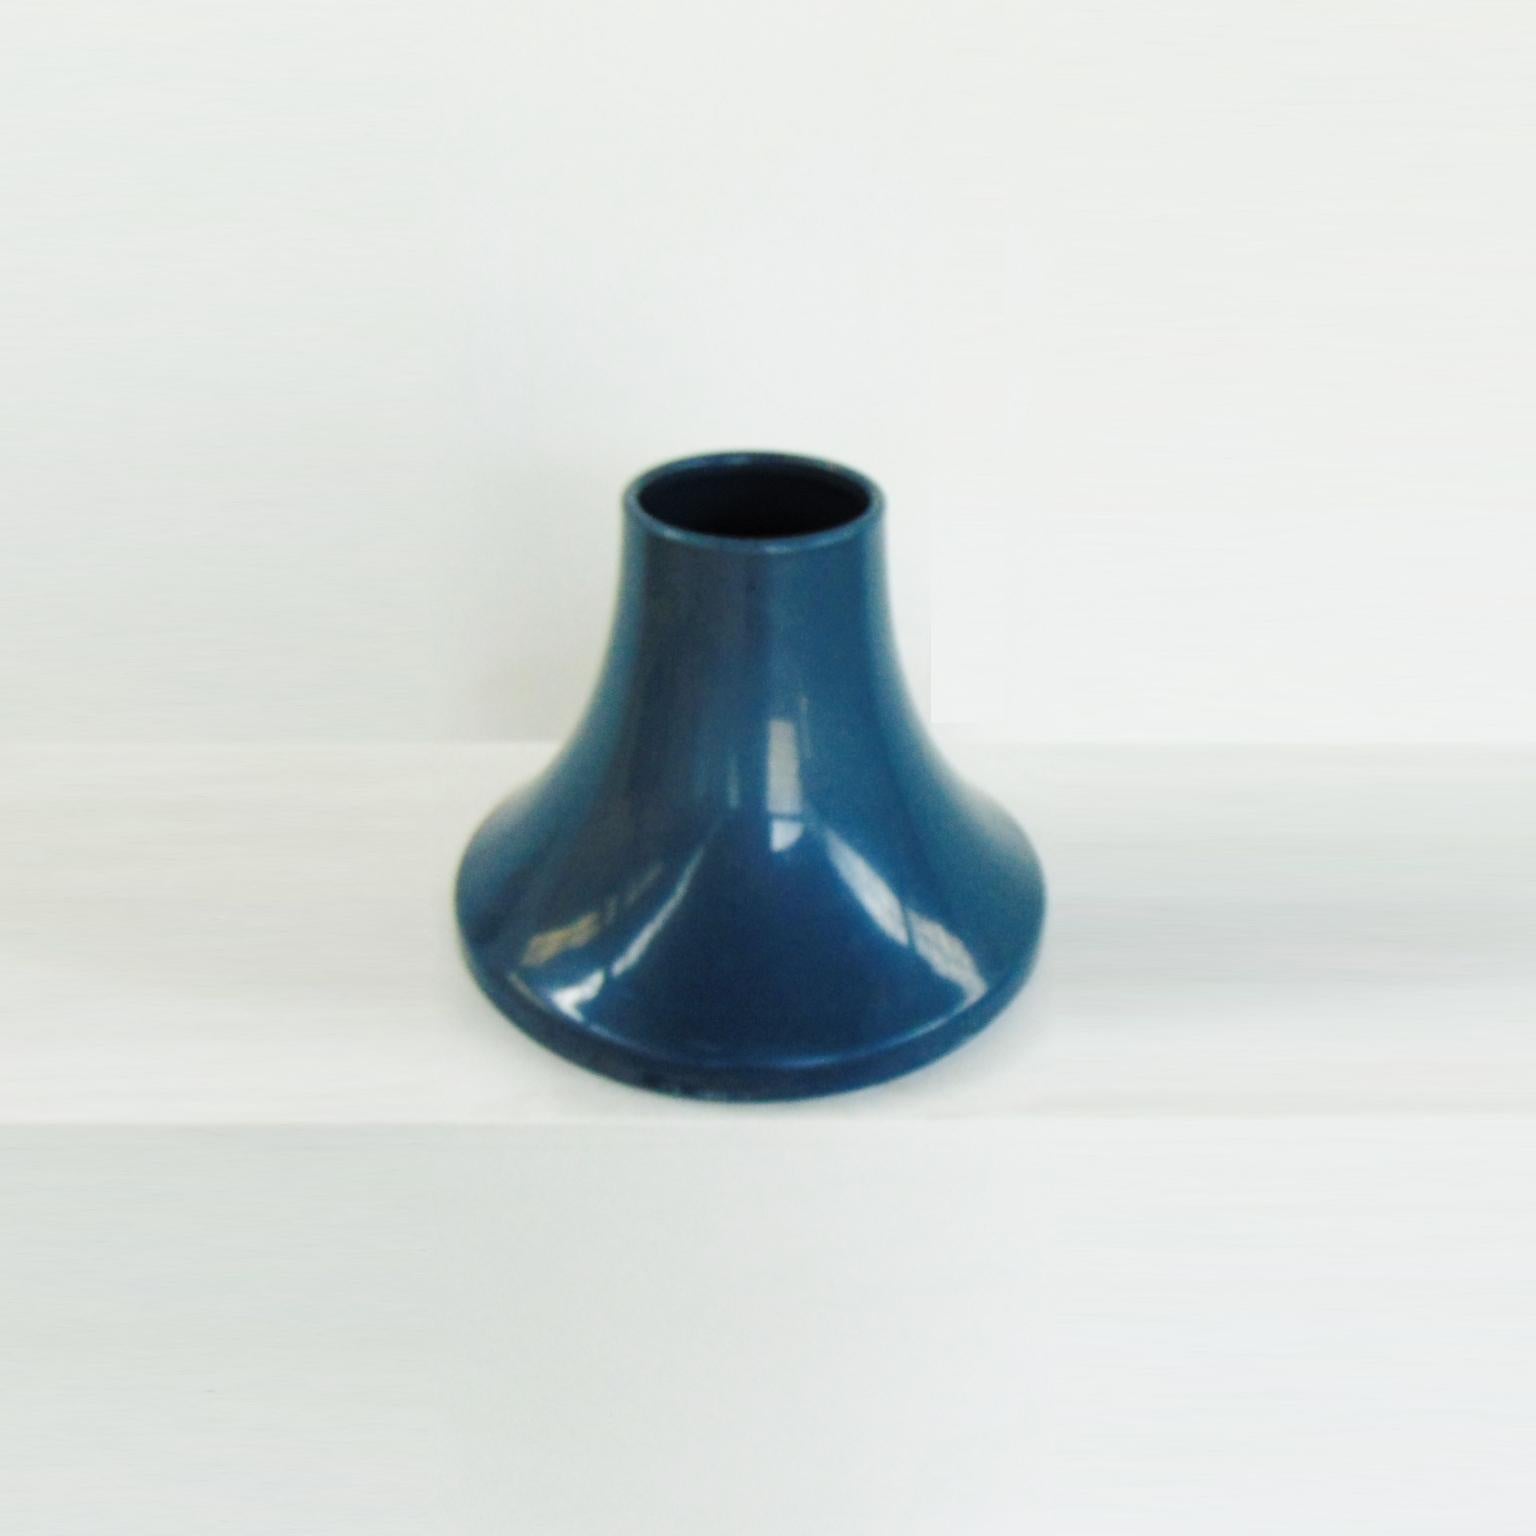 This colorful blueish umbrella stand belongs to the much vaster production of plastic furnishing items of Sormani.
Roberto Lera, an eclectic designer of the early Seventies from Turin, Italy, designed many compact items for Sormani. All pieces